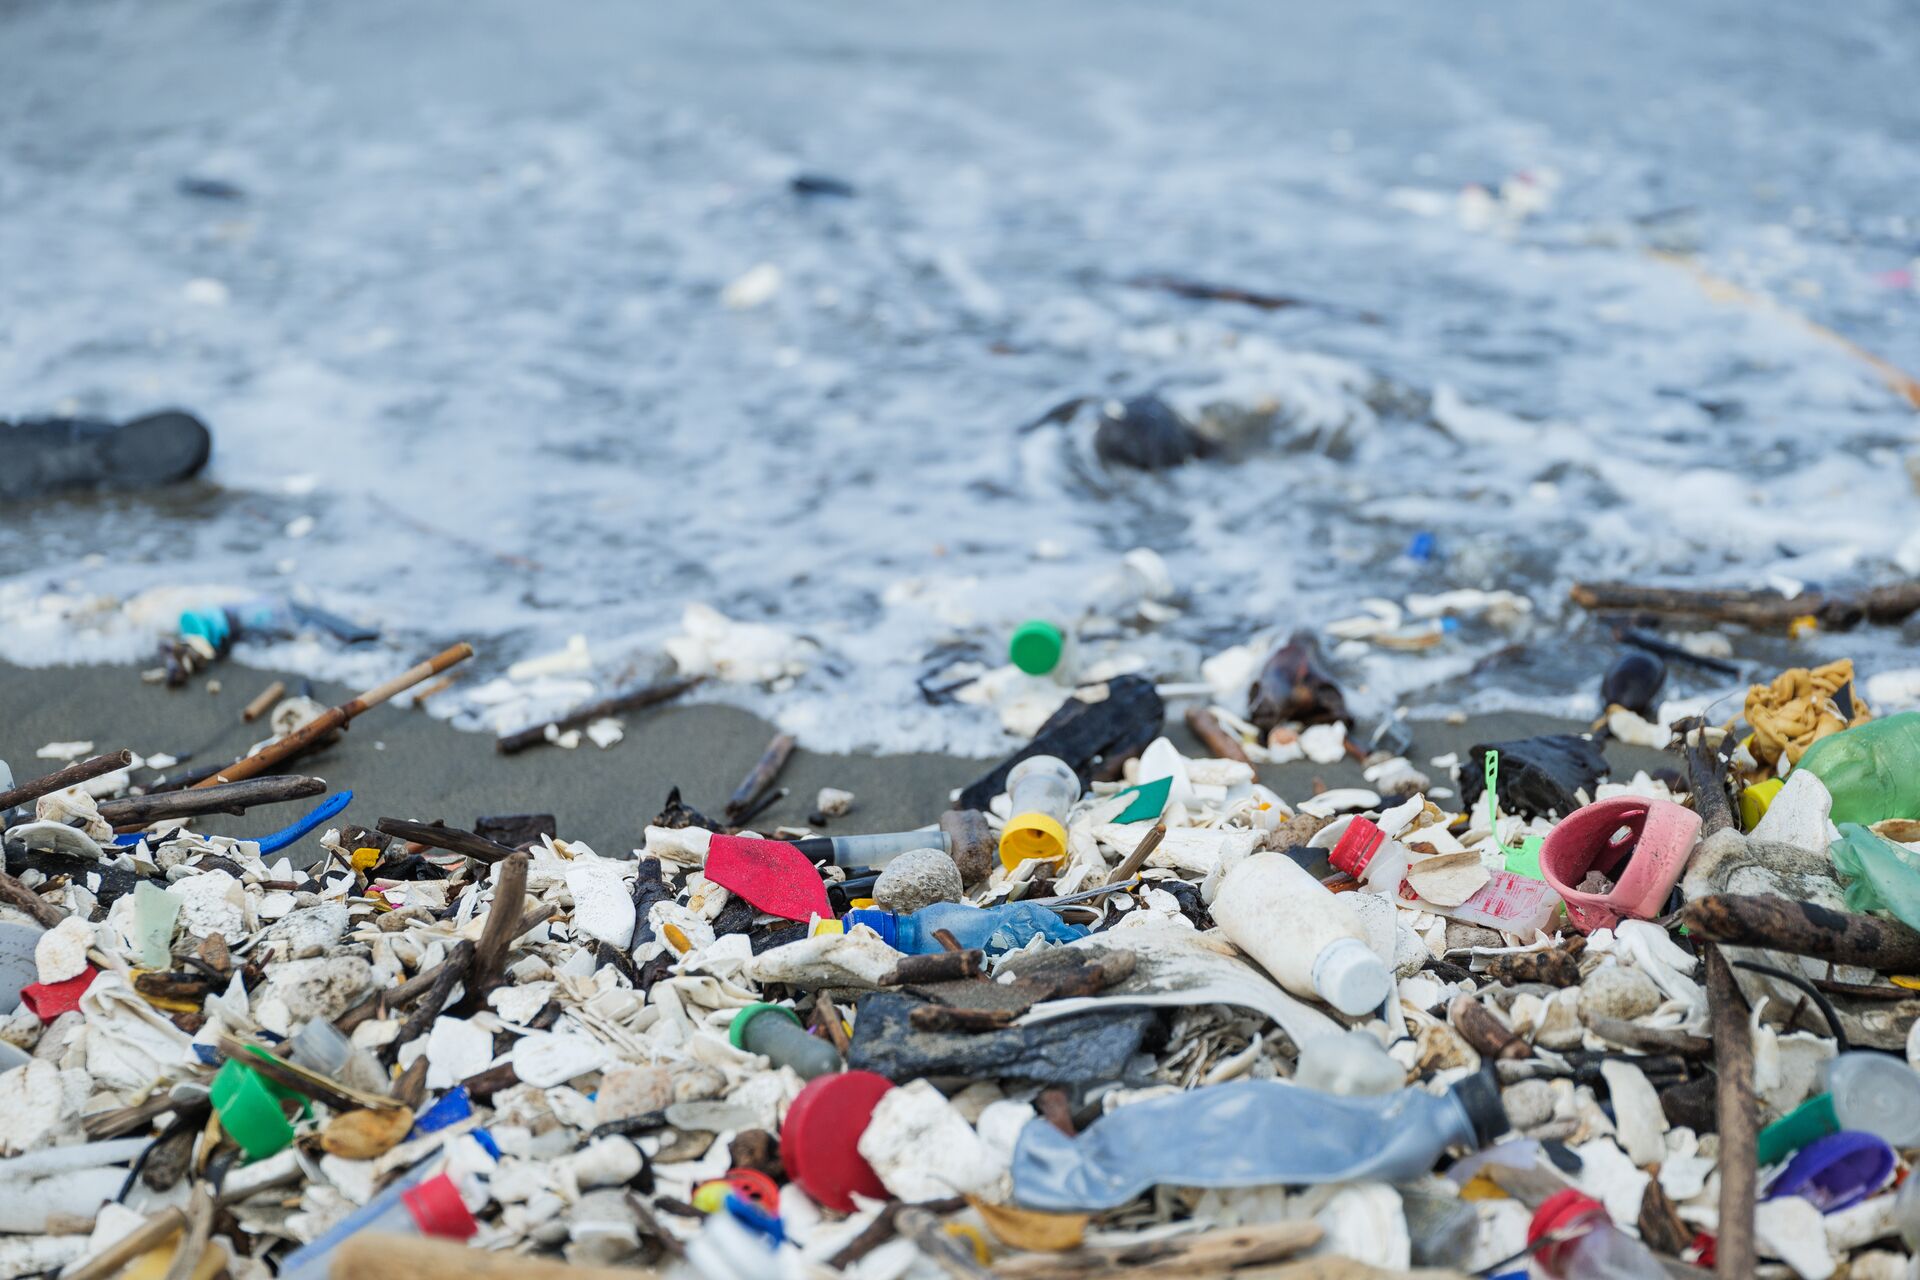 REPORT: Environmental Justice Impacts of Marine Litter and Plastic